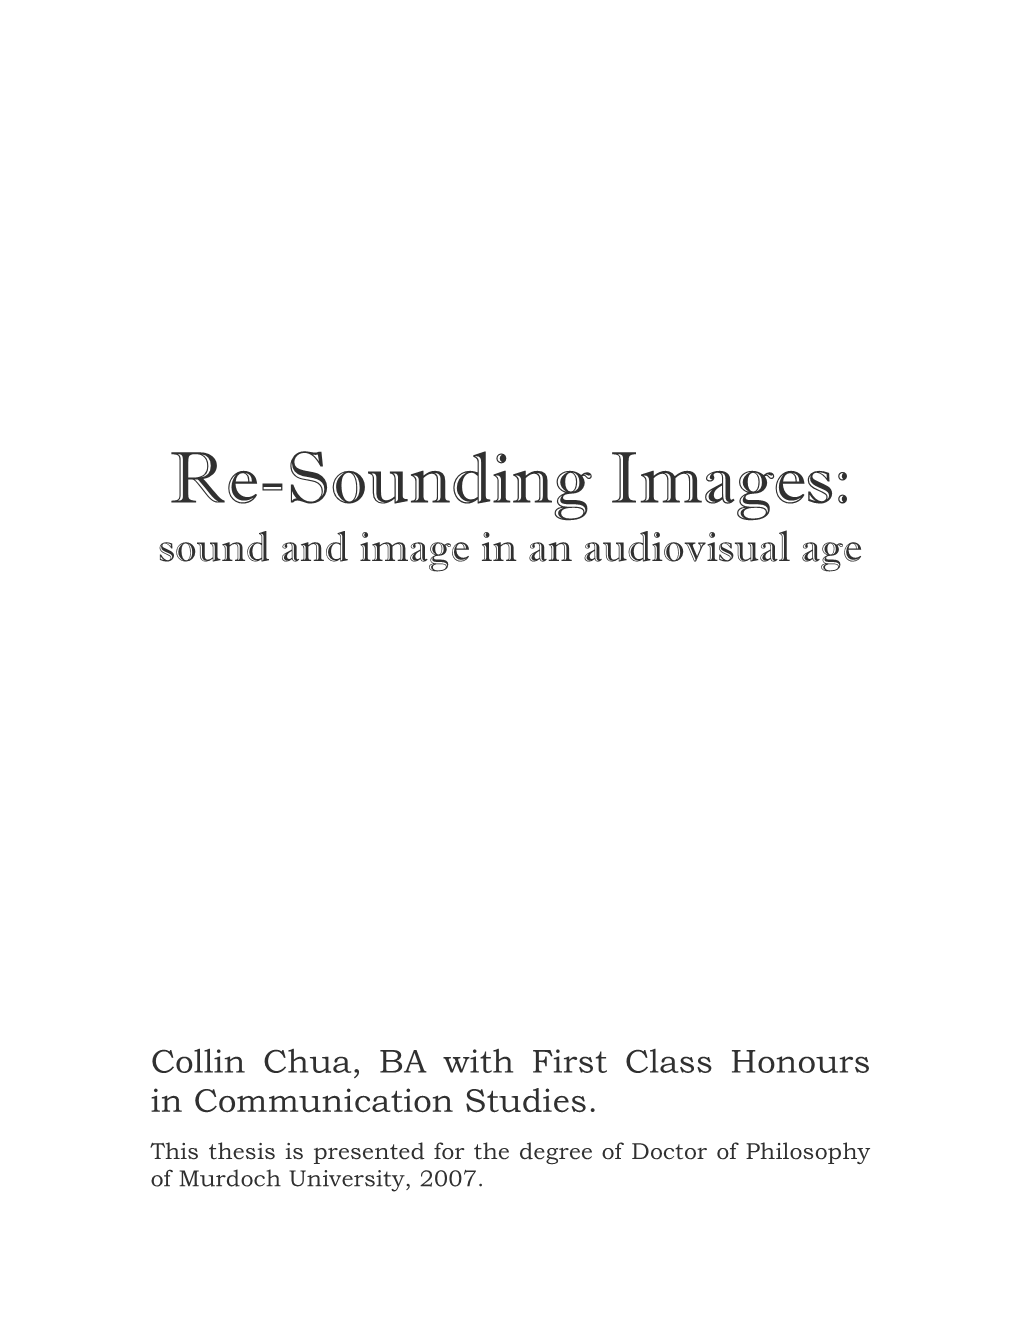 Re-Sounding Images: Sound and Image in an Audiovisual Age